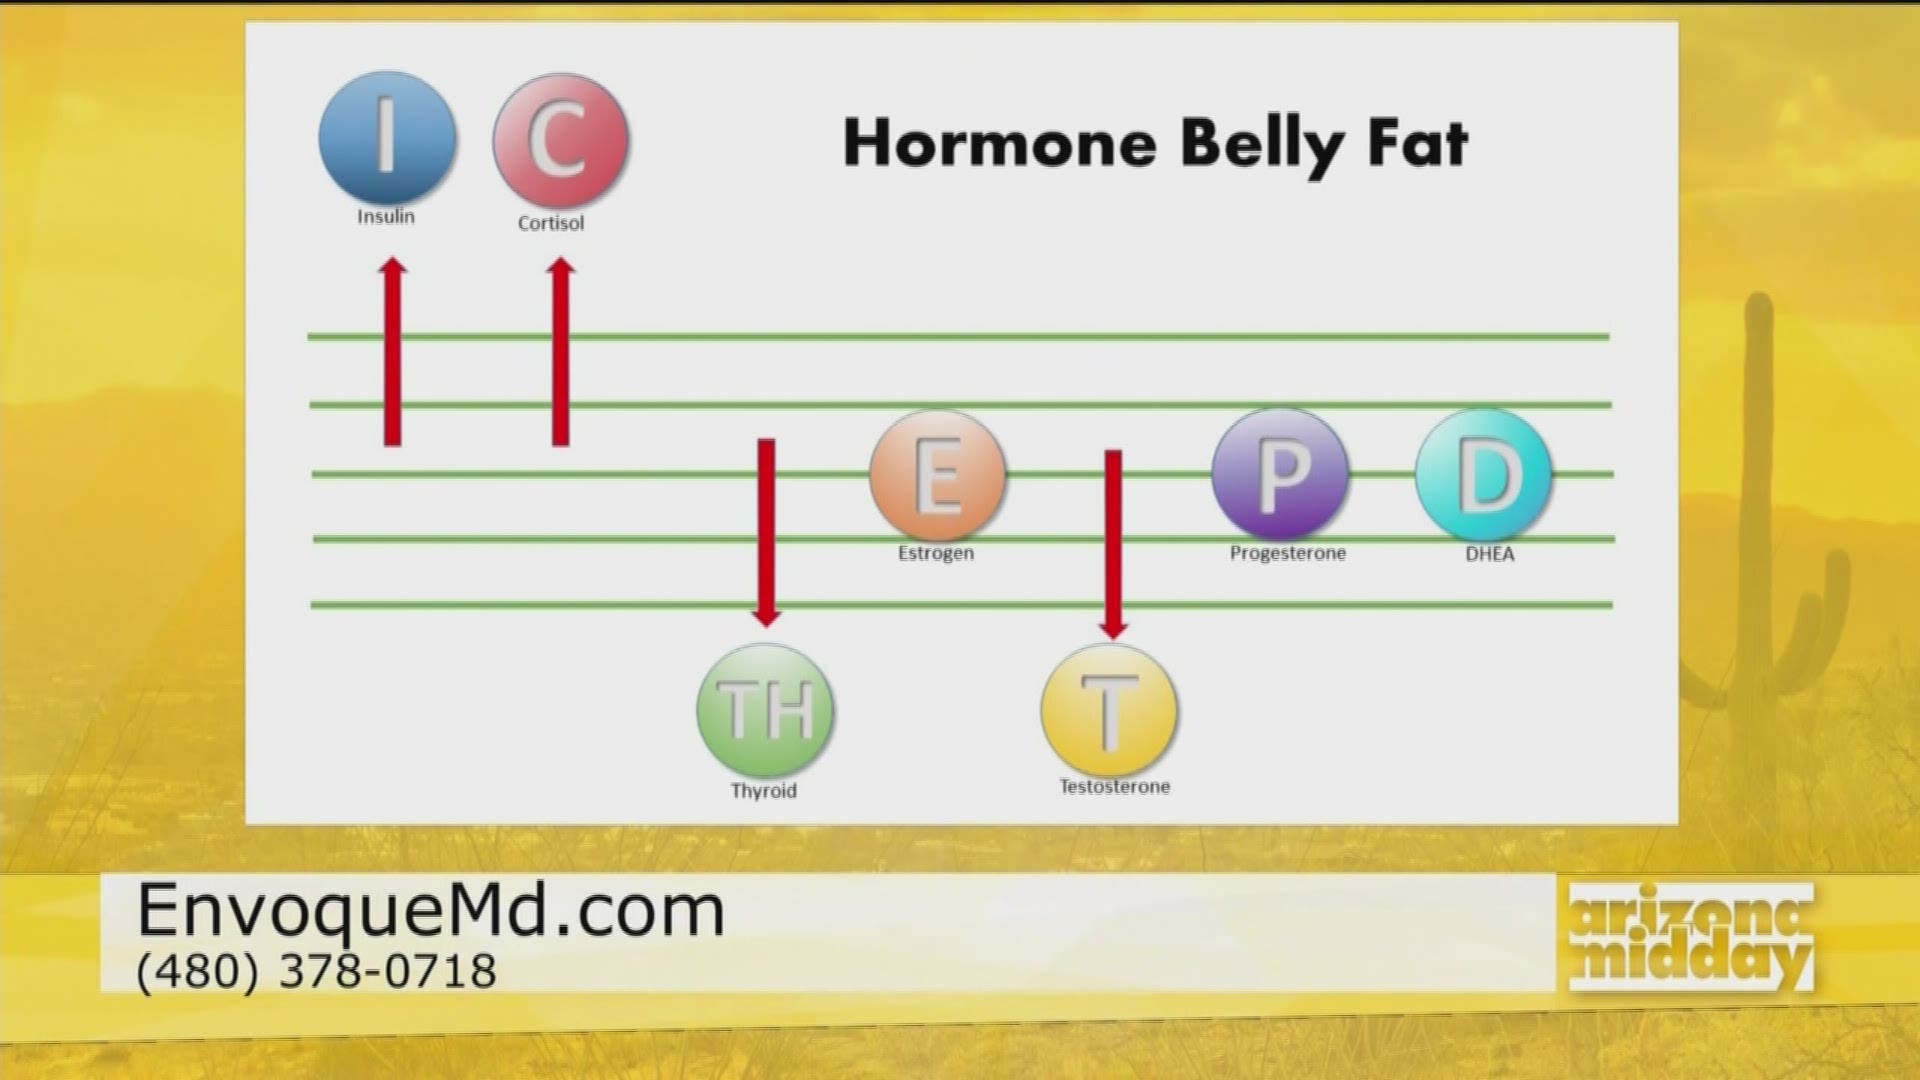 Envoque MD explains a simple hormone test that can lead to helping you melt belly fat and get better sleep.